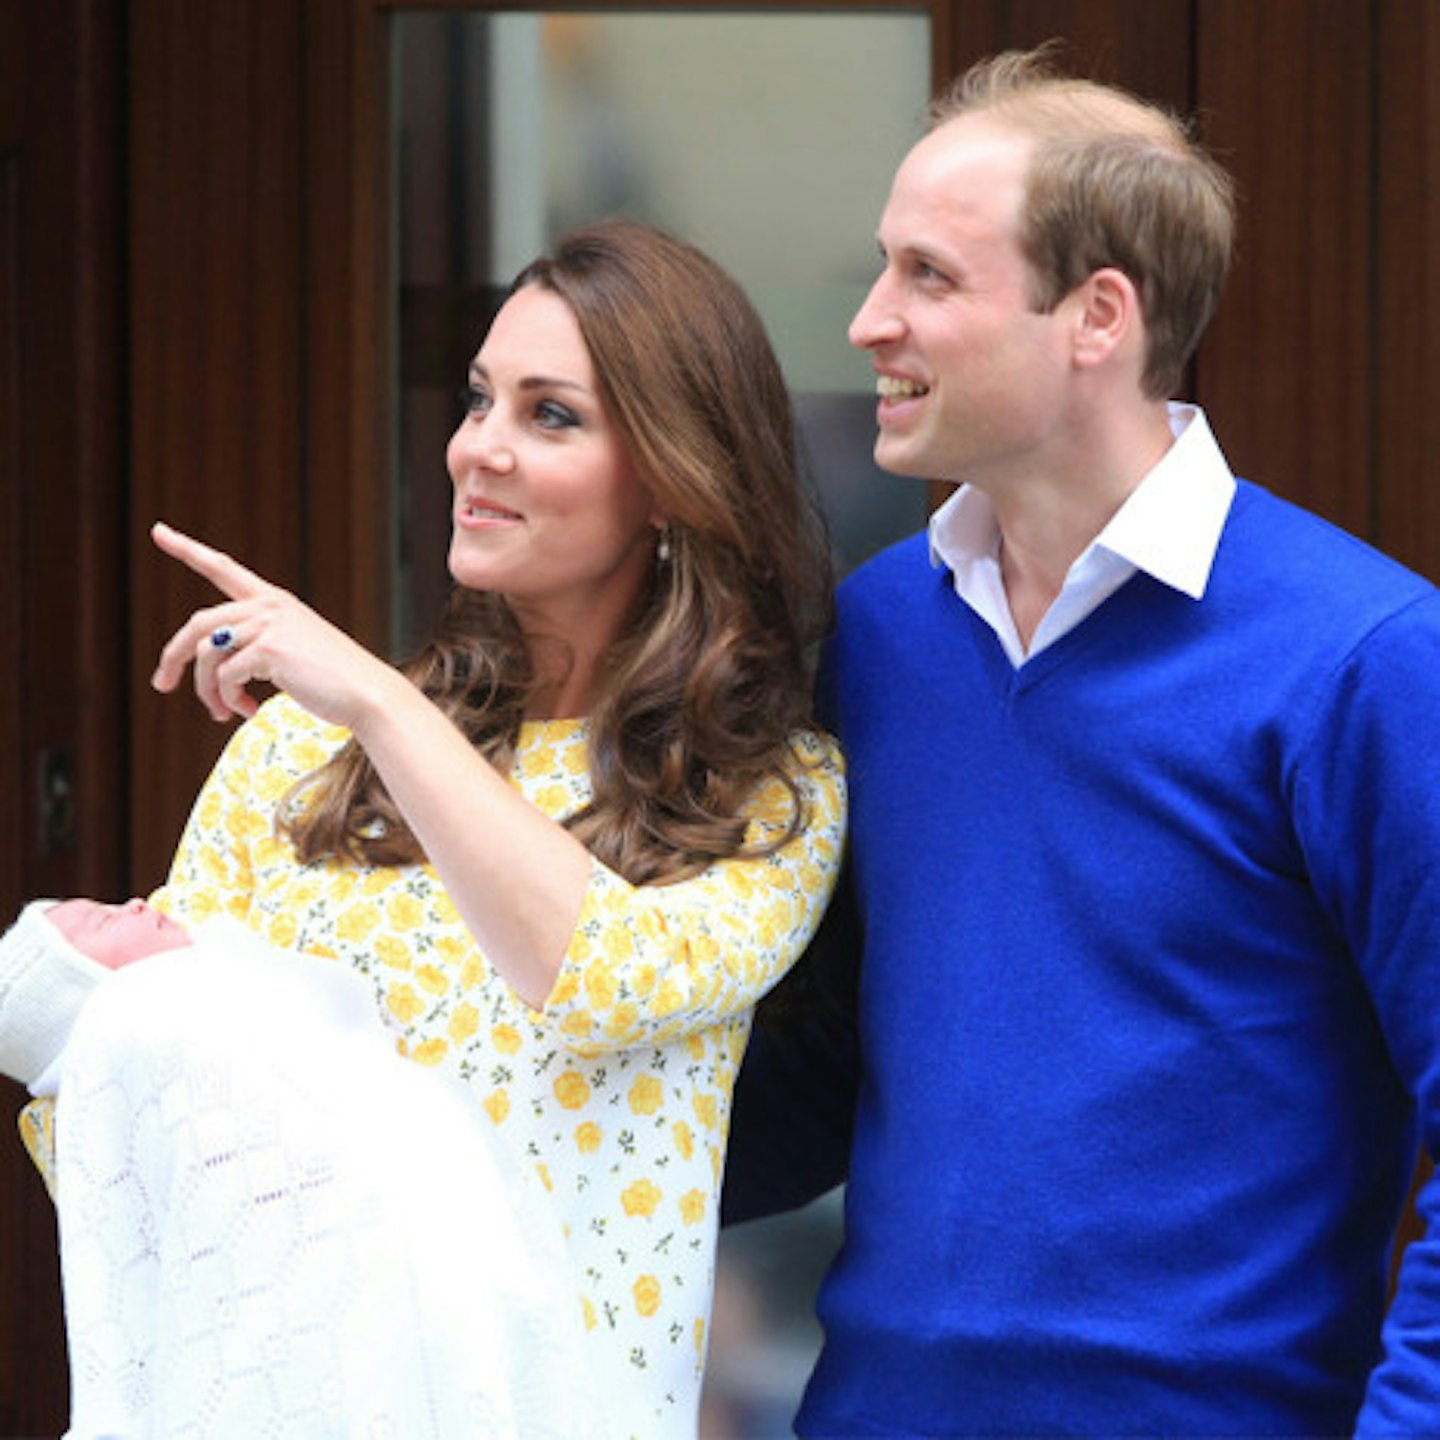 Who will Kate and Wills choose to become Charlotte's godparents?